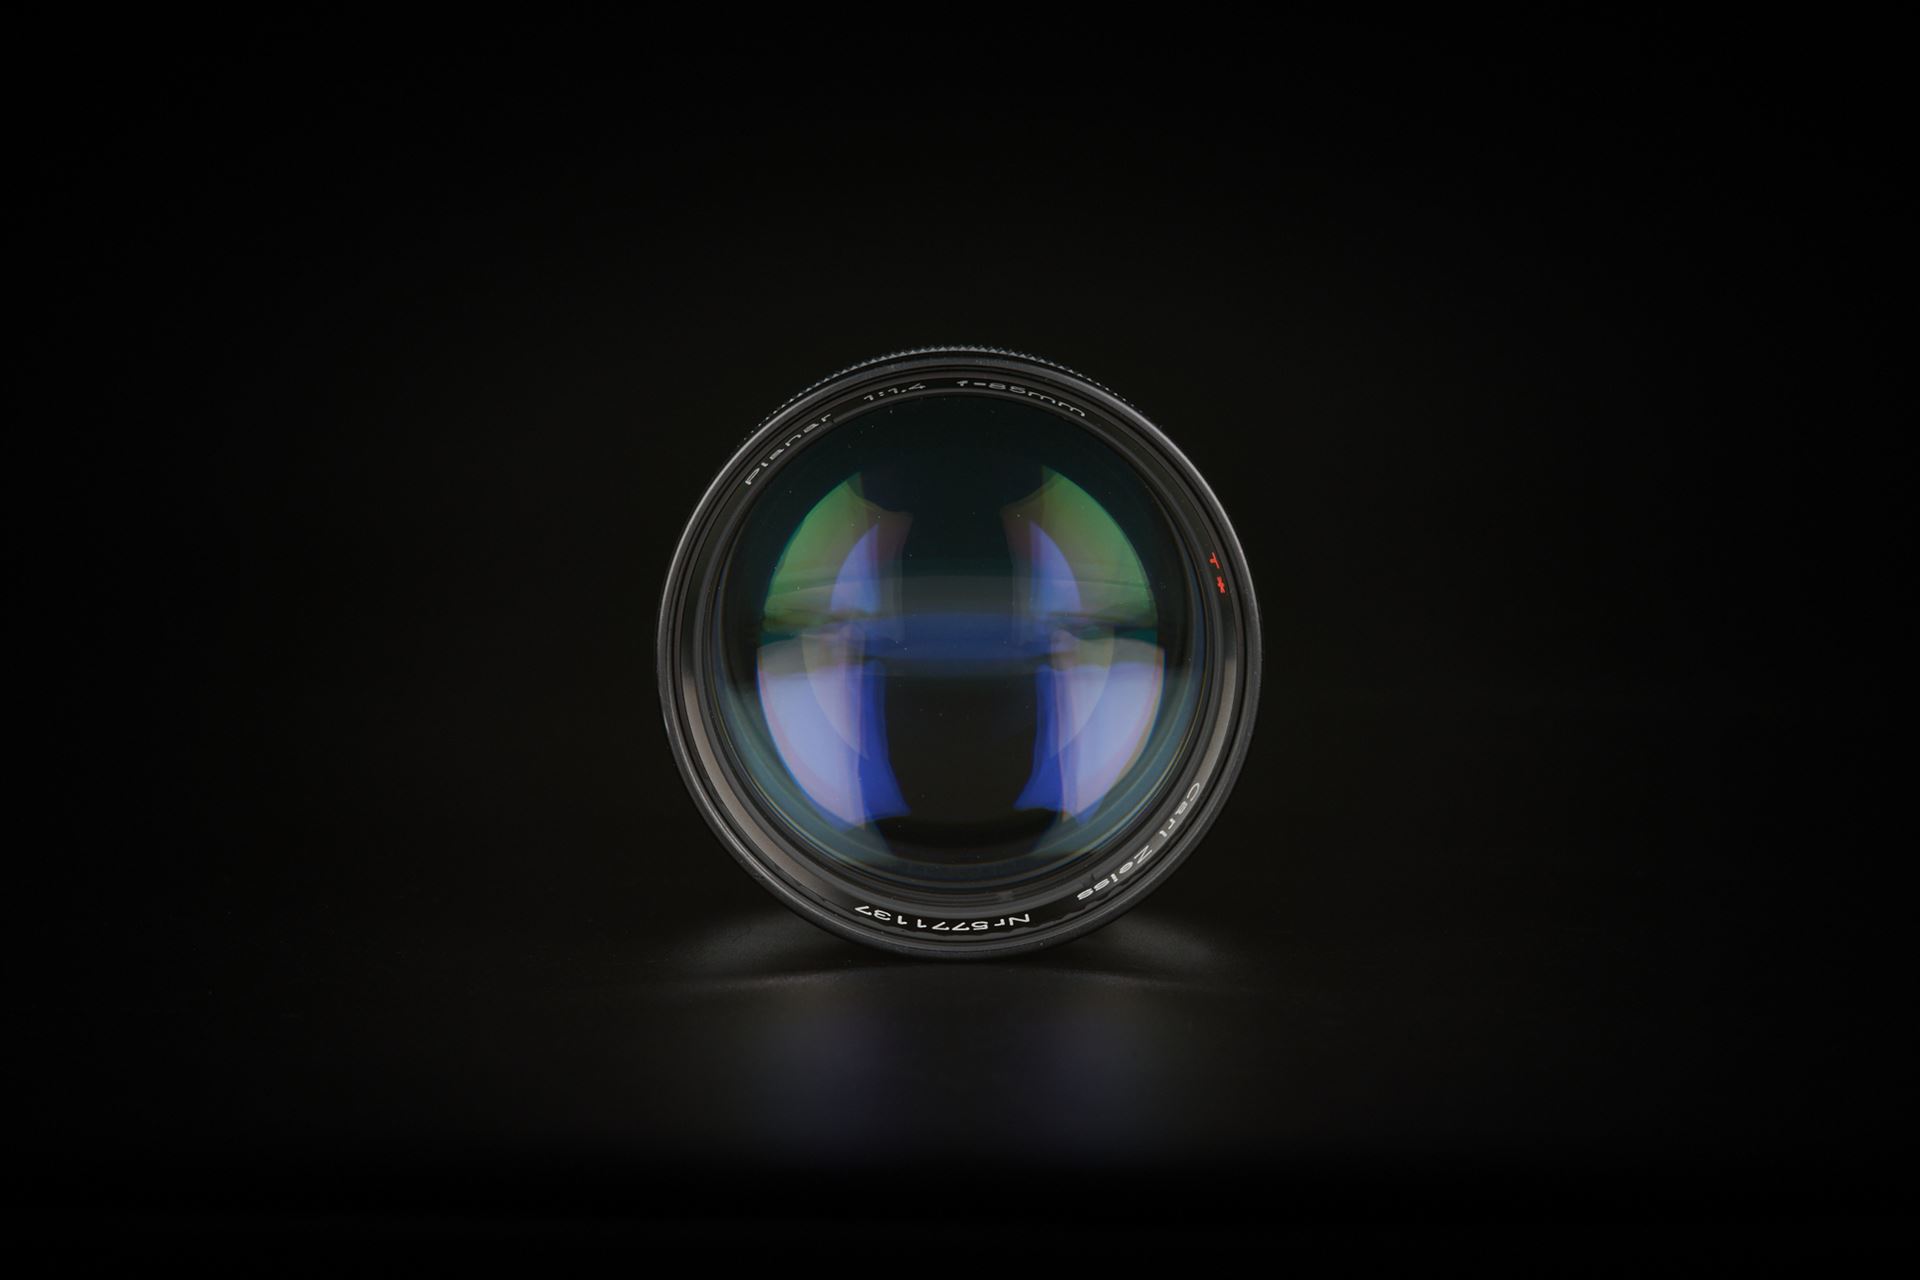 Picture of contarex planar 85mm f/1.4